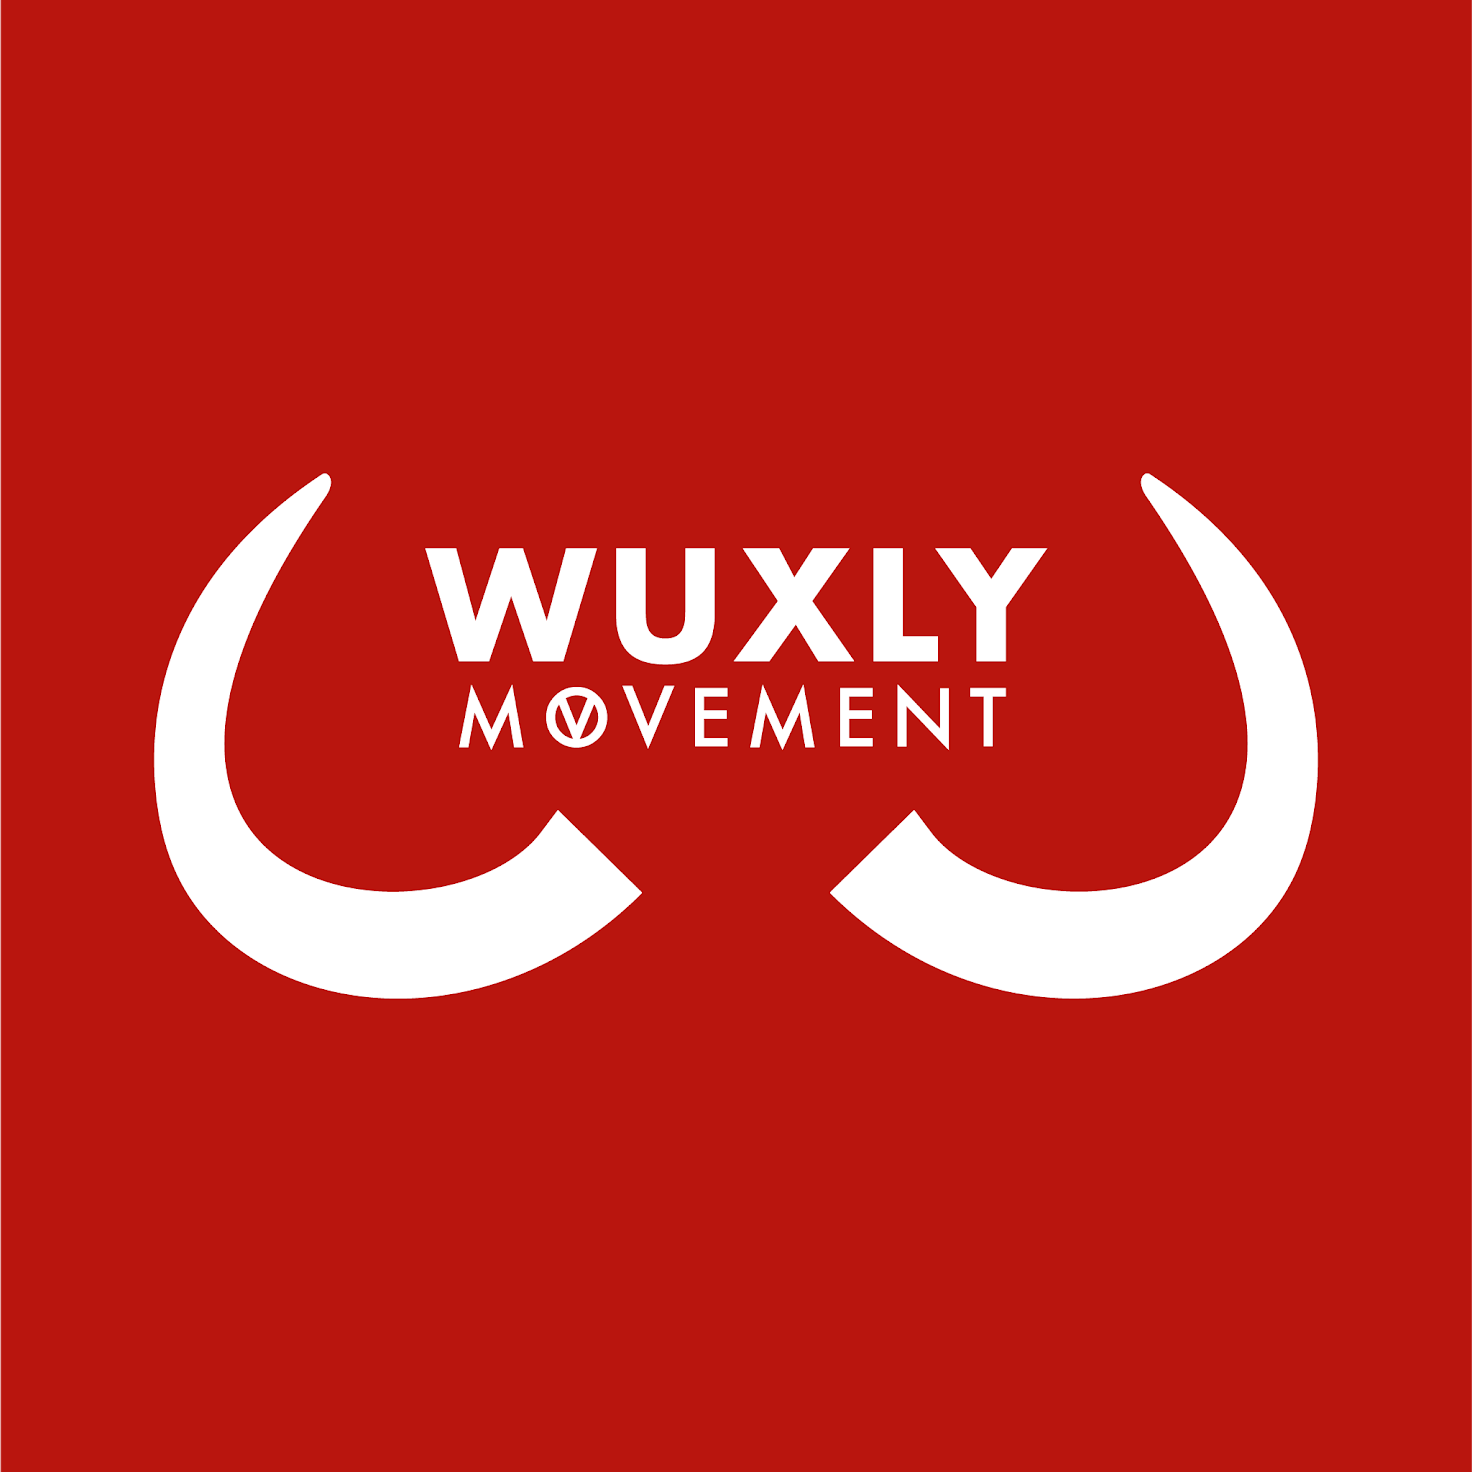 Wully Outerwear announces rebrand to Wuxly Movement